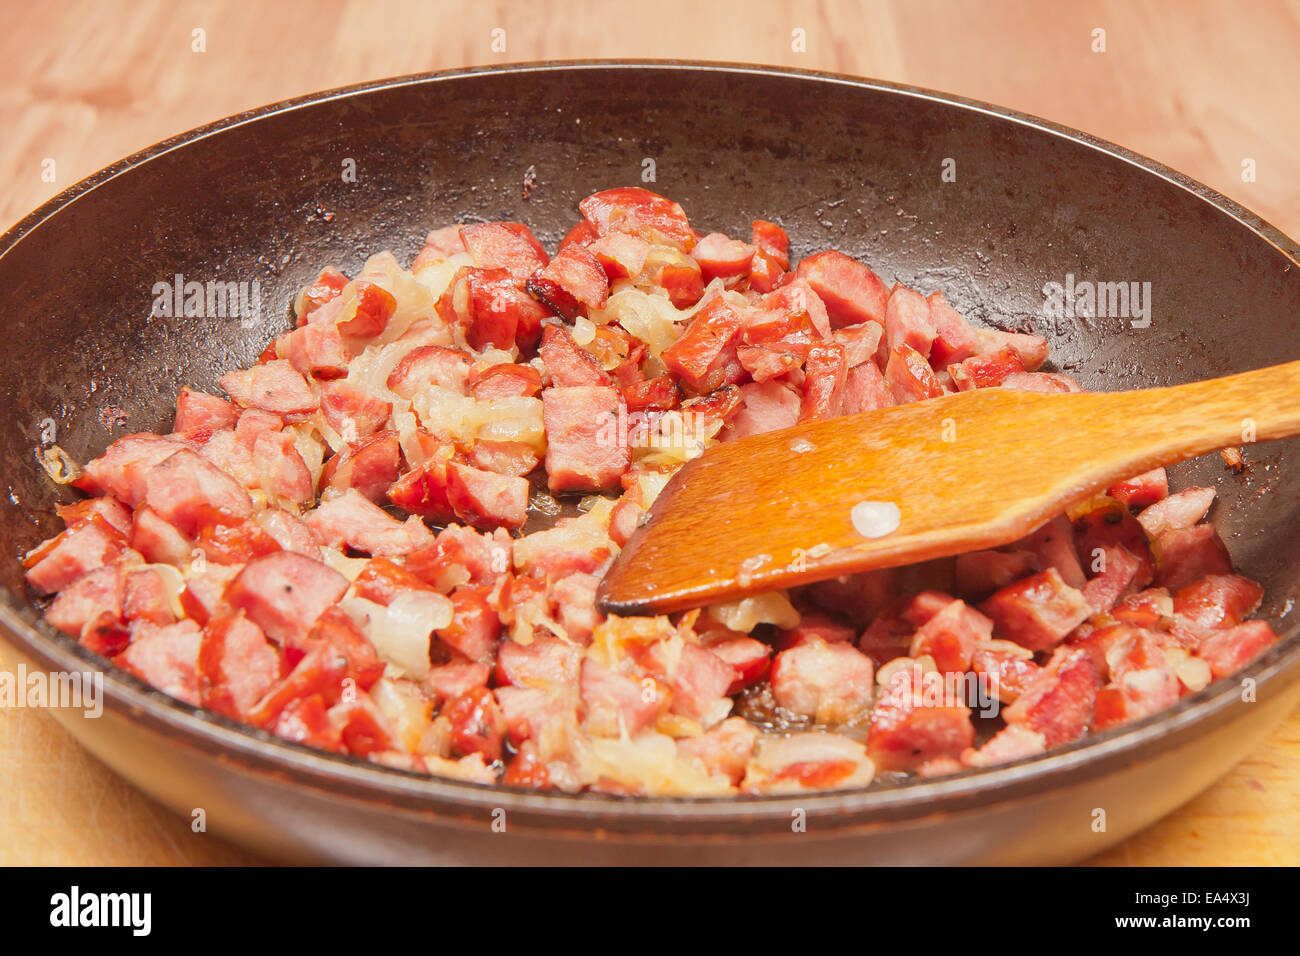 Fired sausage and onion on a frying pan. Stock Photo